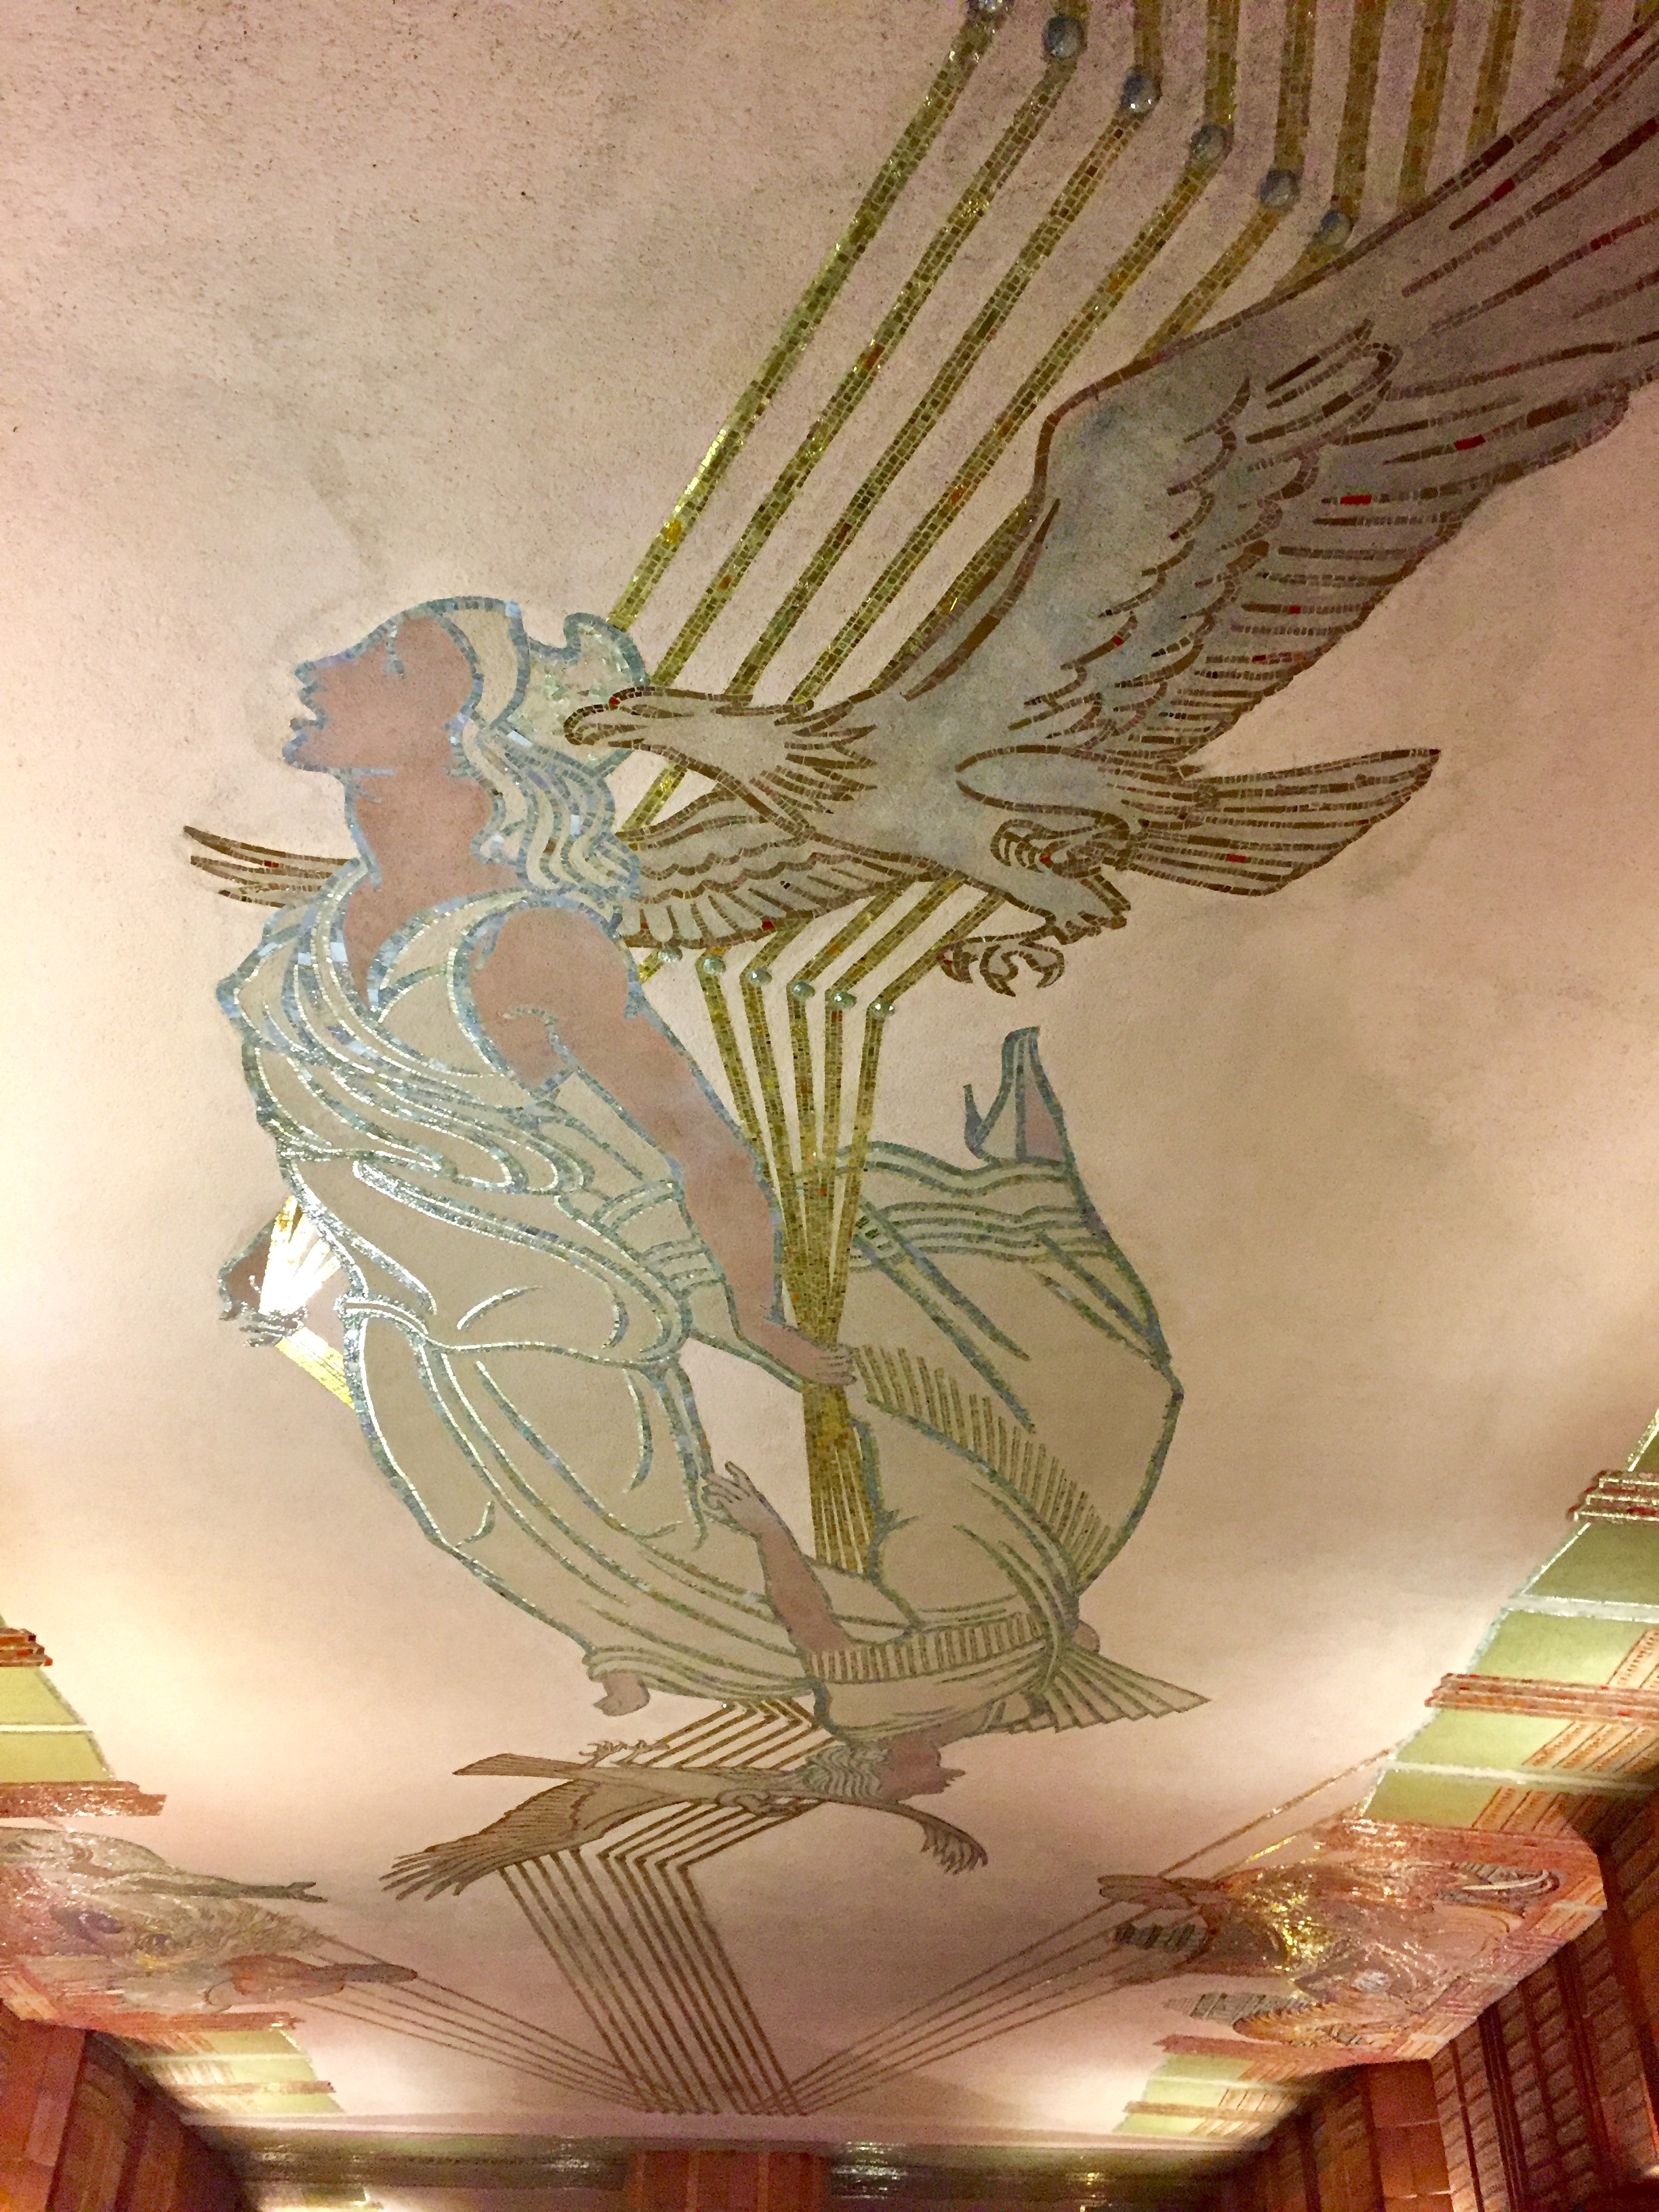 AT&T_Long_Distance_Building_Lobby_Eagle_Ceiling_Mosaic.jpg